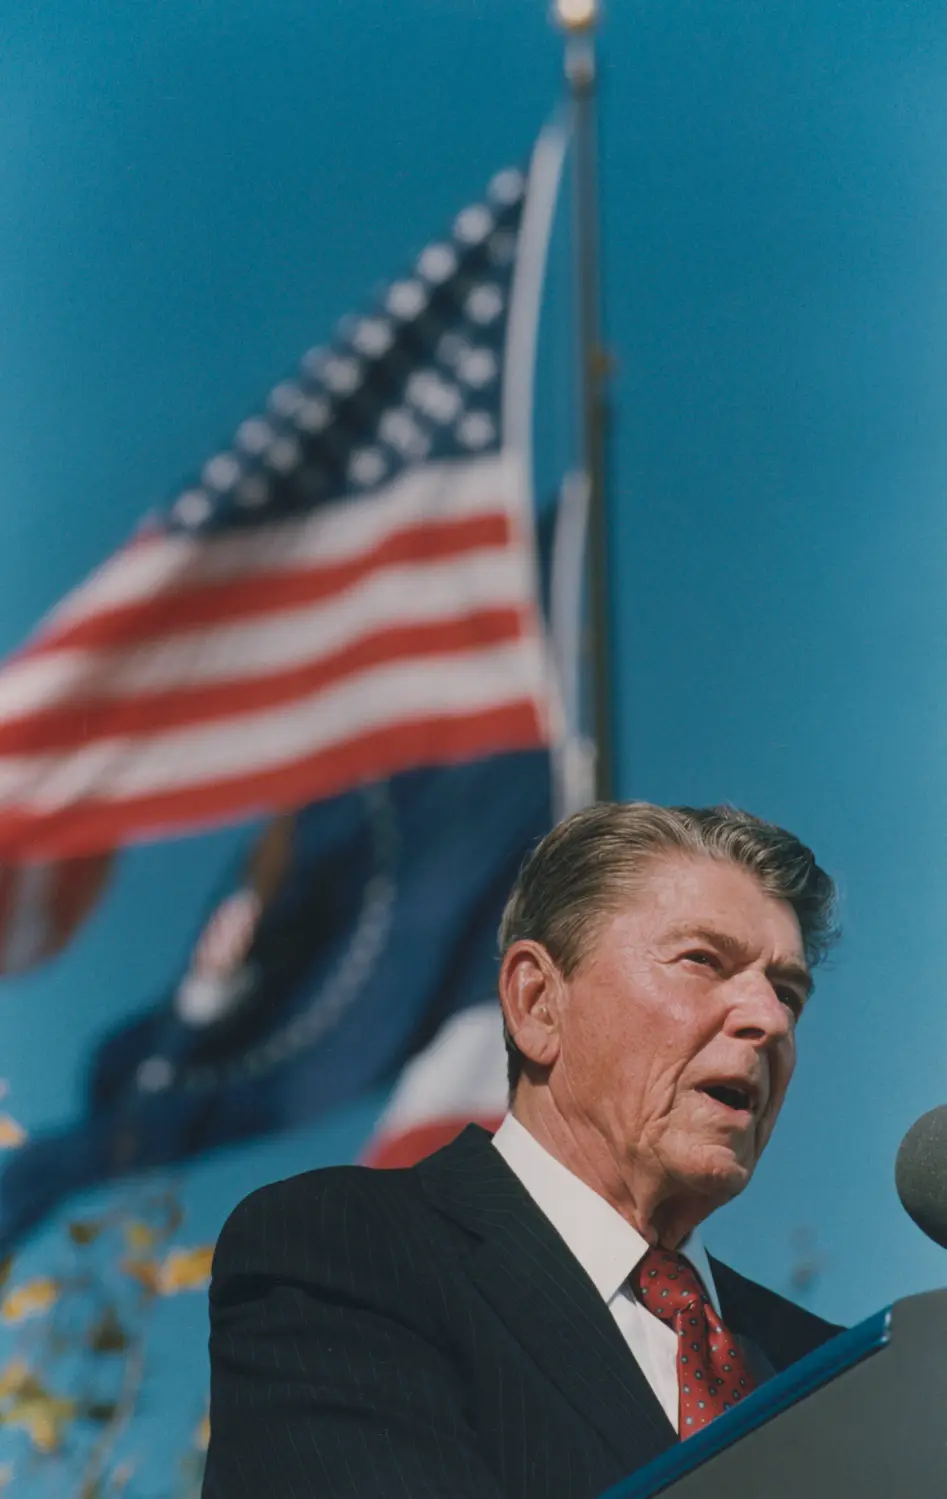 The United States flag flutters behind former President Ronald Reagan.